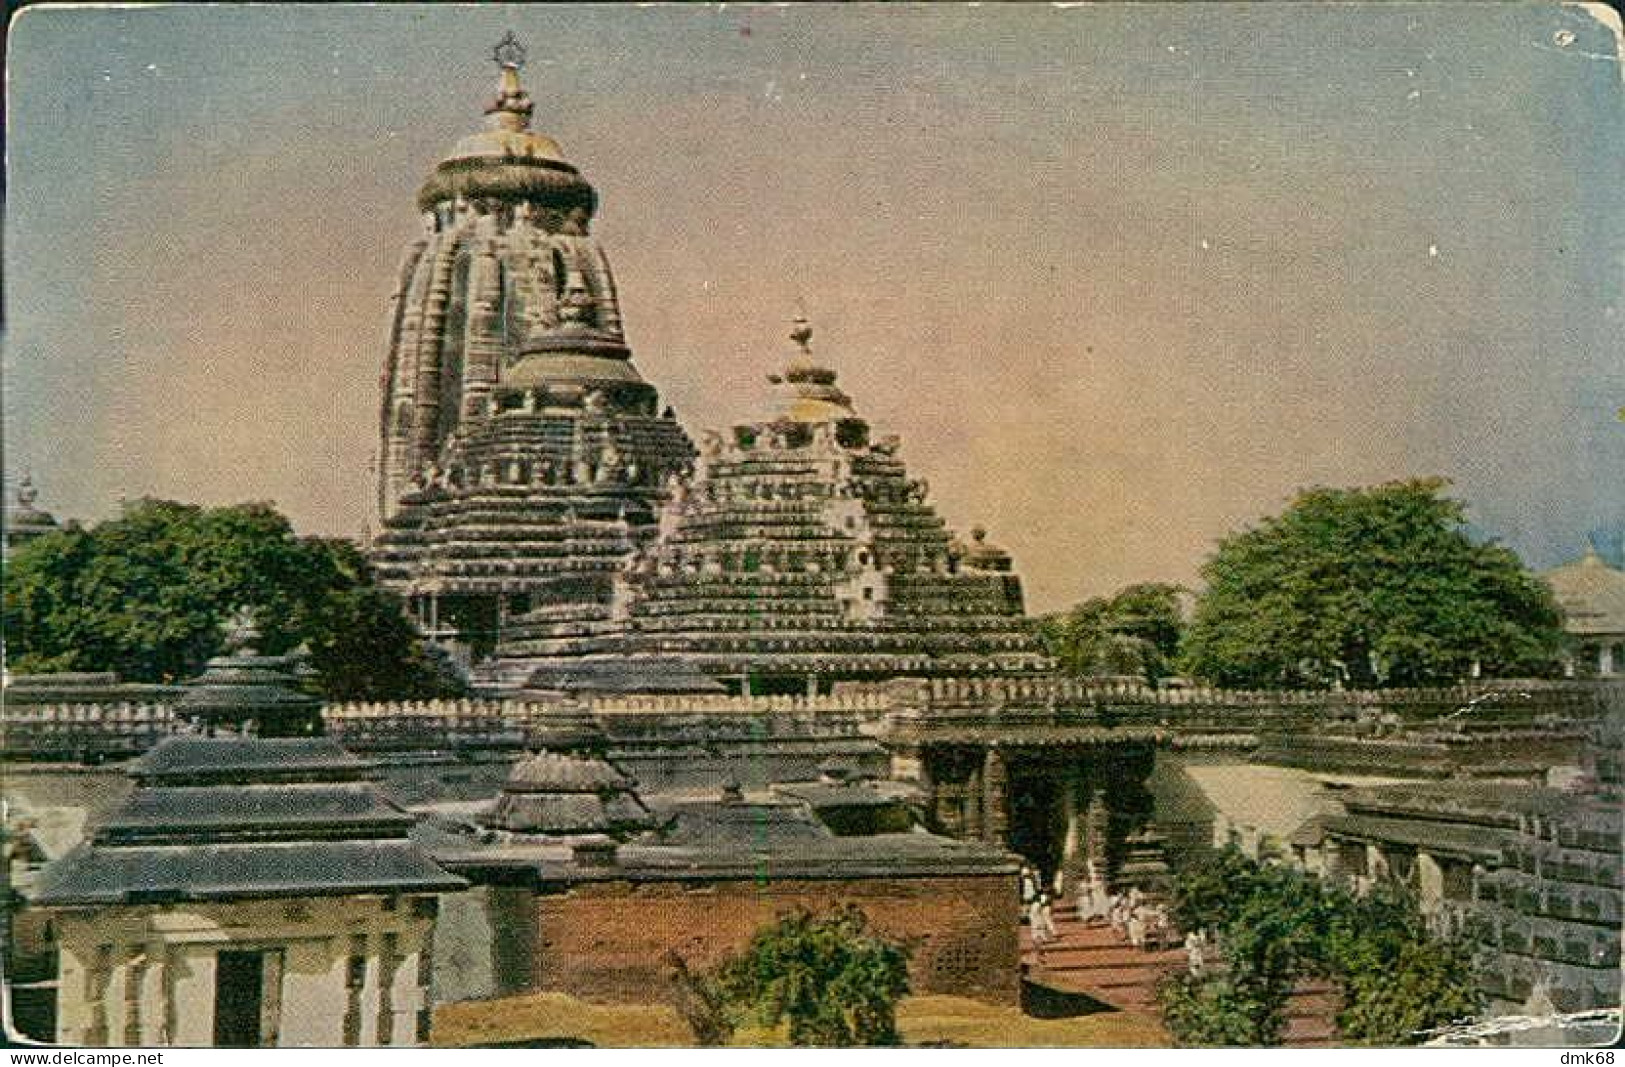 INDIA - JAGANNATH TEMPLE PURI - ORISSA - RPPC POSTCARD MAILED BY AIR MAIL TO U.S.A. - STAMPS / 1950s  (18378) - India